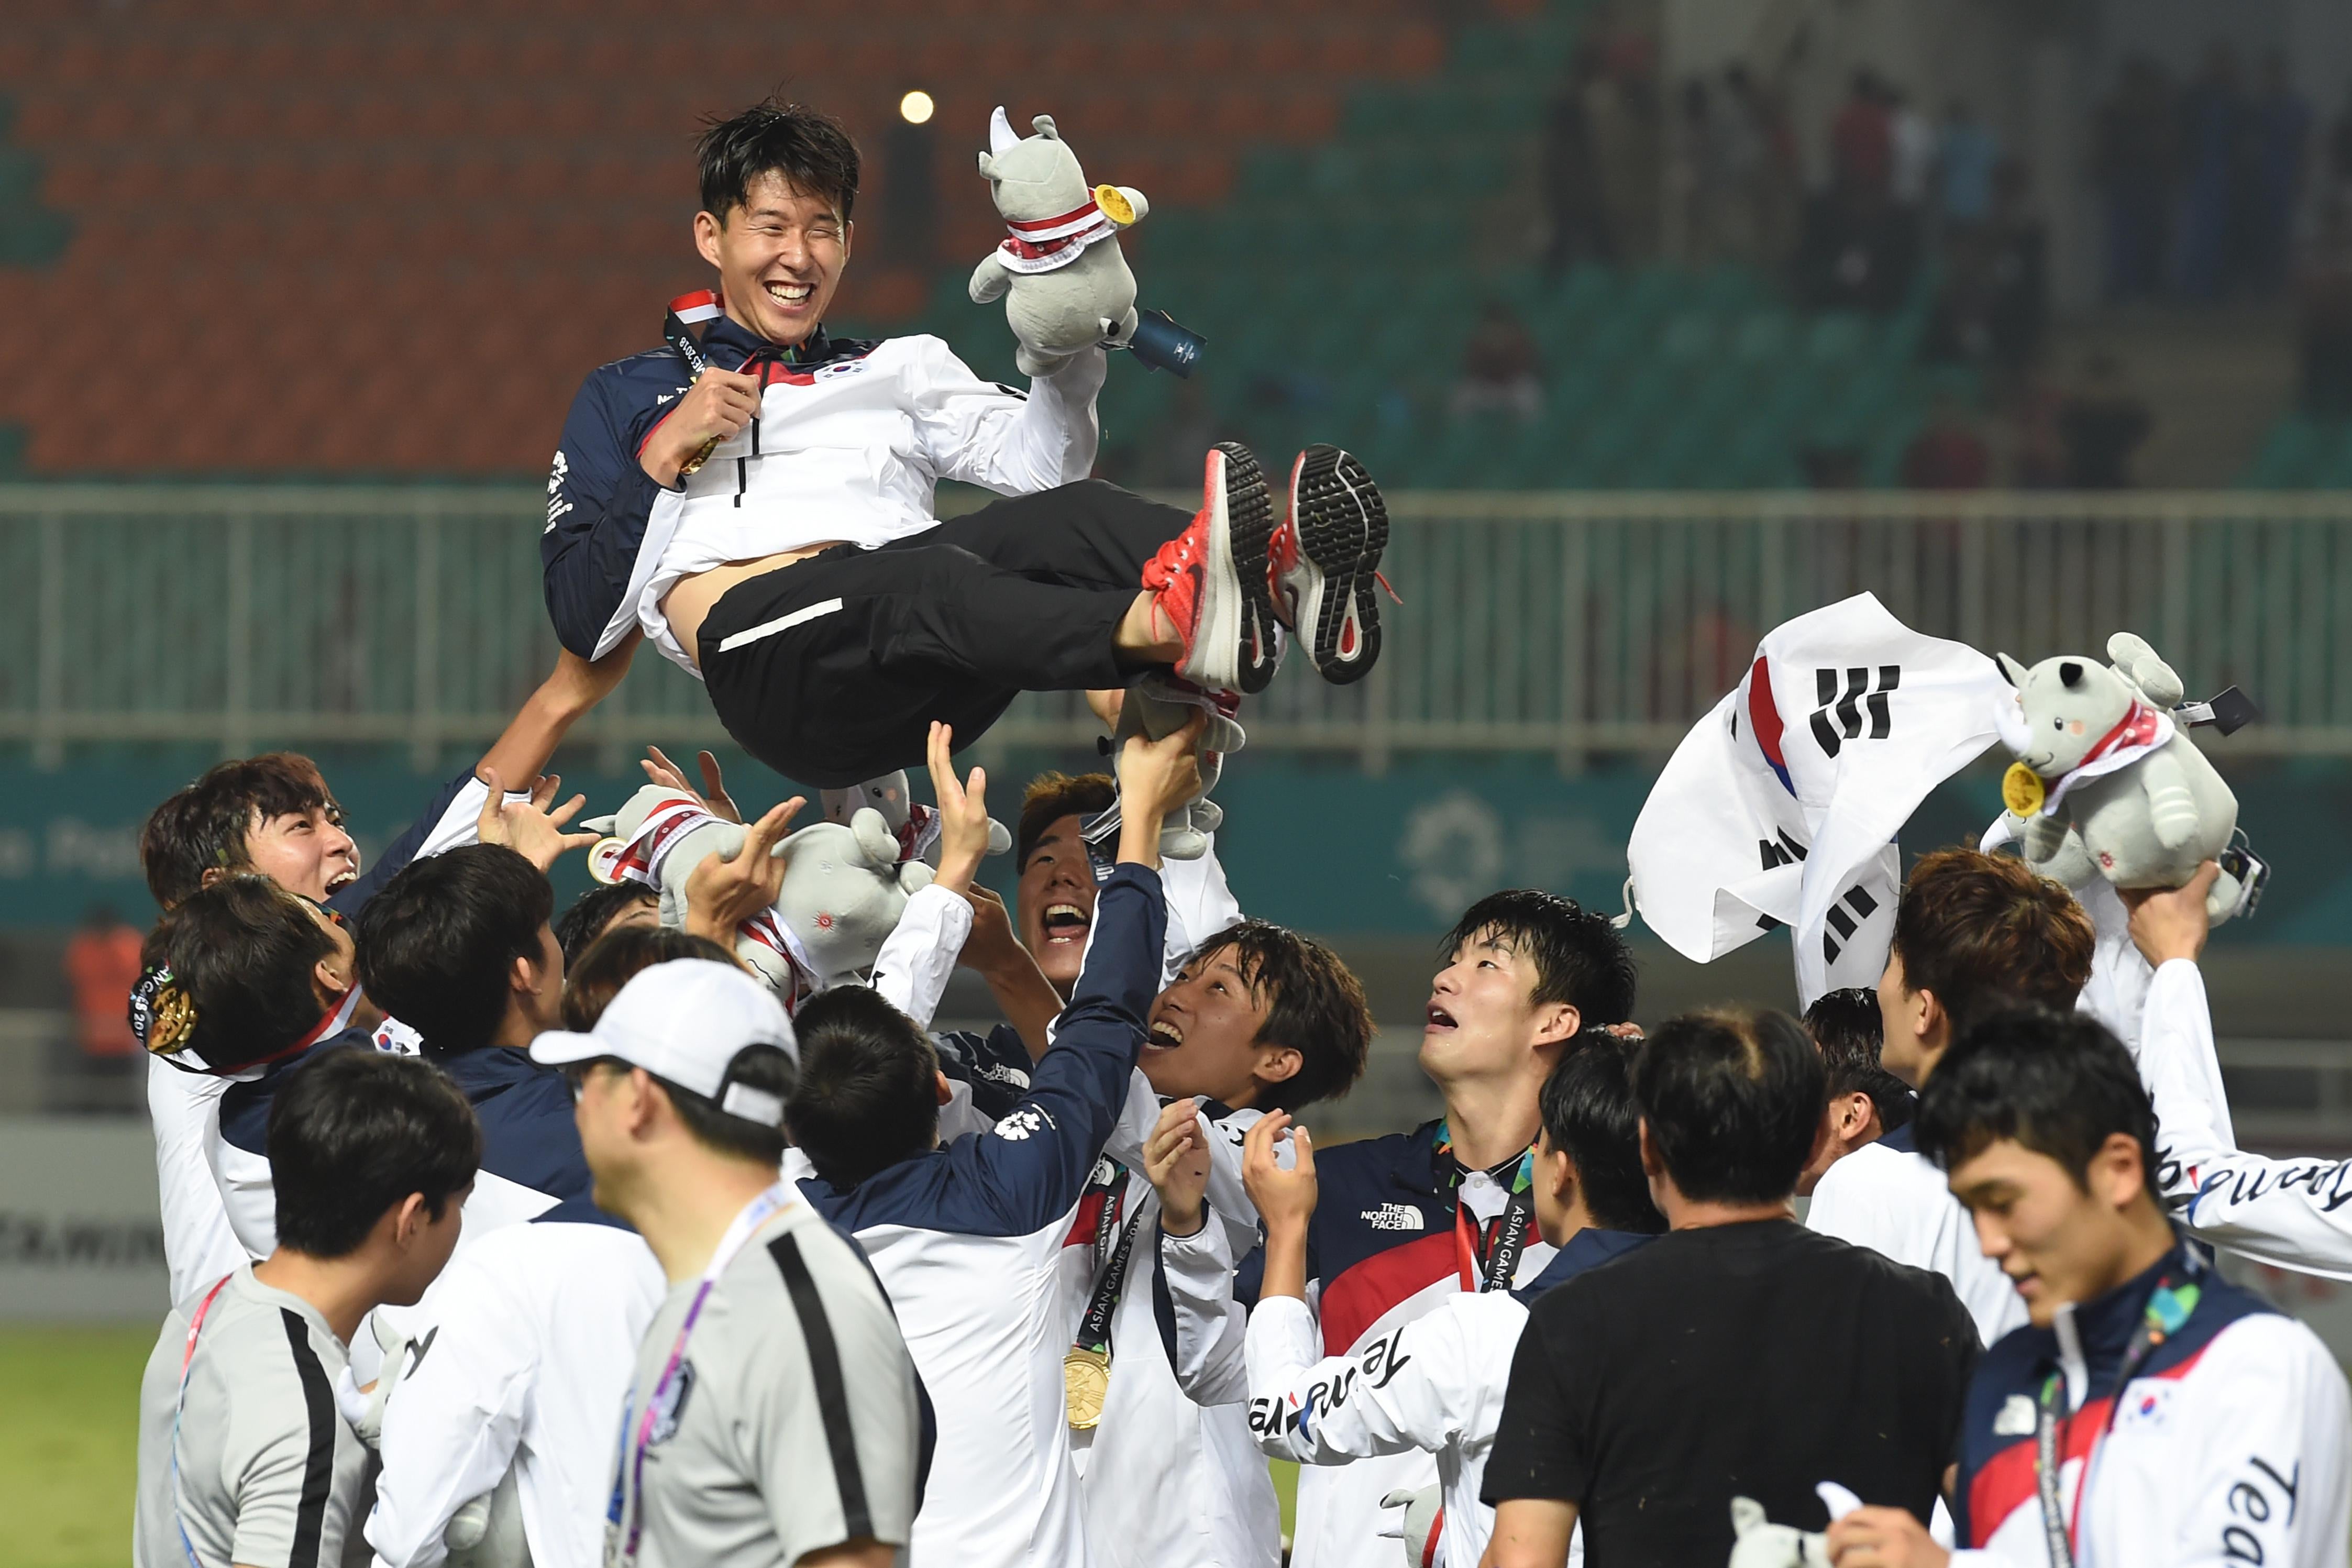 South Korea's players toss their teammate Son Heung-min in the air after the victory ceremony for the mens football competition at the 2018 Asian Games in Bogor on September 1, 2018. (Photo by Arief Bagus / AFP)        (Photo credit should read ARIEF BAGUS/AFP/Getty Images)